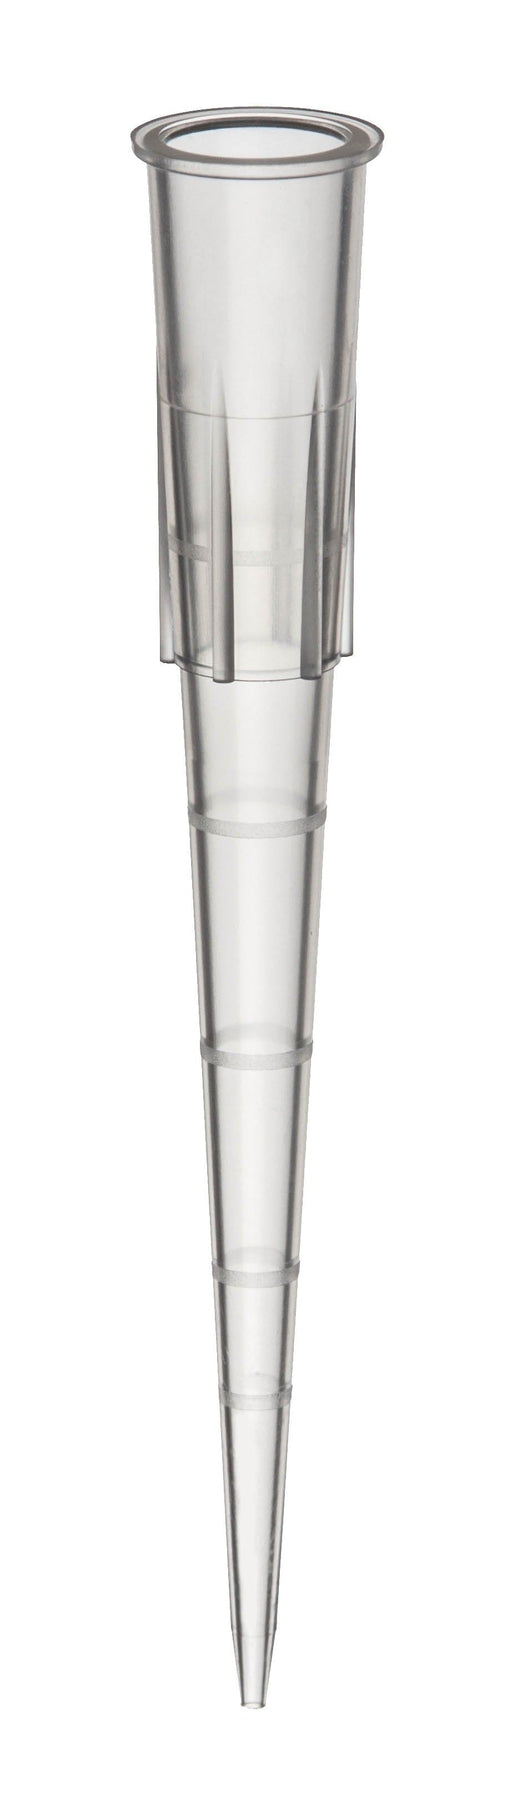 Labcon Eclipse™ Pipette Tip Refill Tower: Clear Graduated 1093-260 Pipette Tips Labcon 200 μl, 960/Pack, 10 Packs/Cs